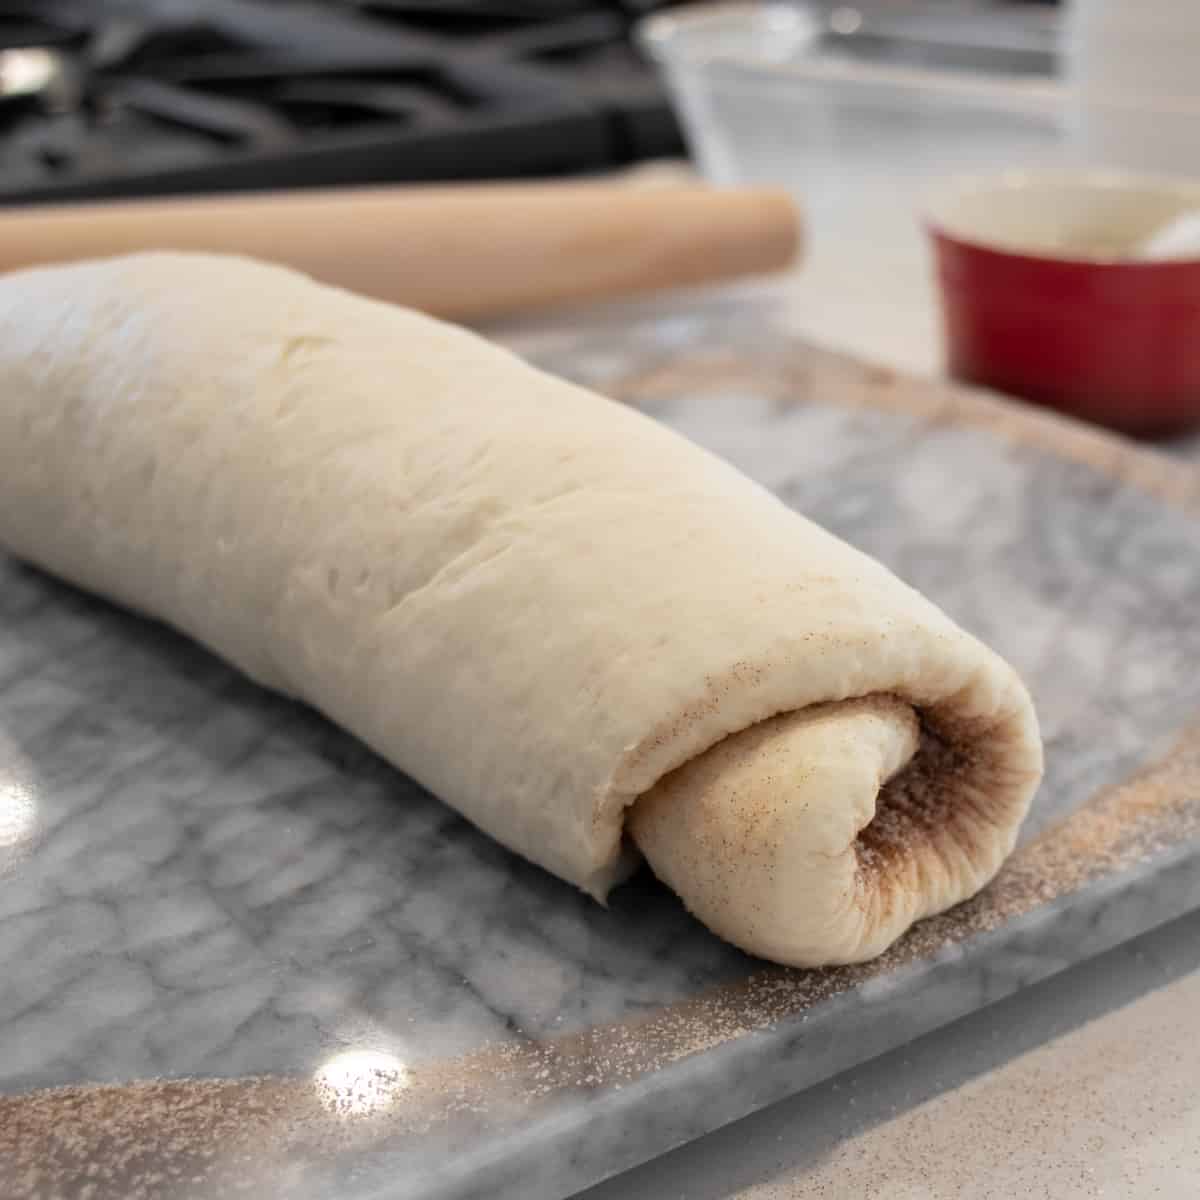 Dough rolled into a log and resting on a marble board.